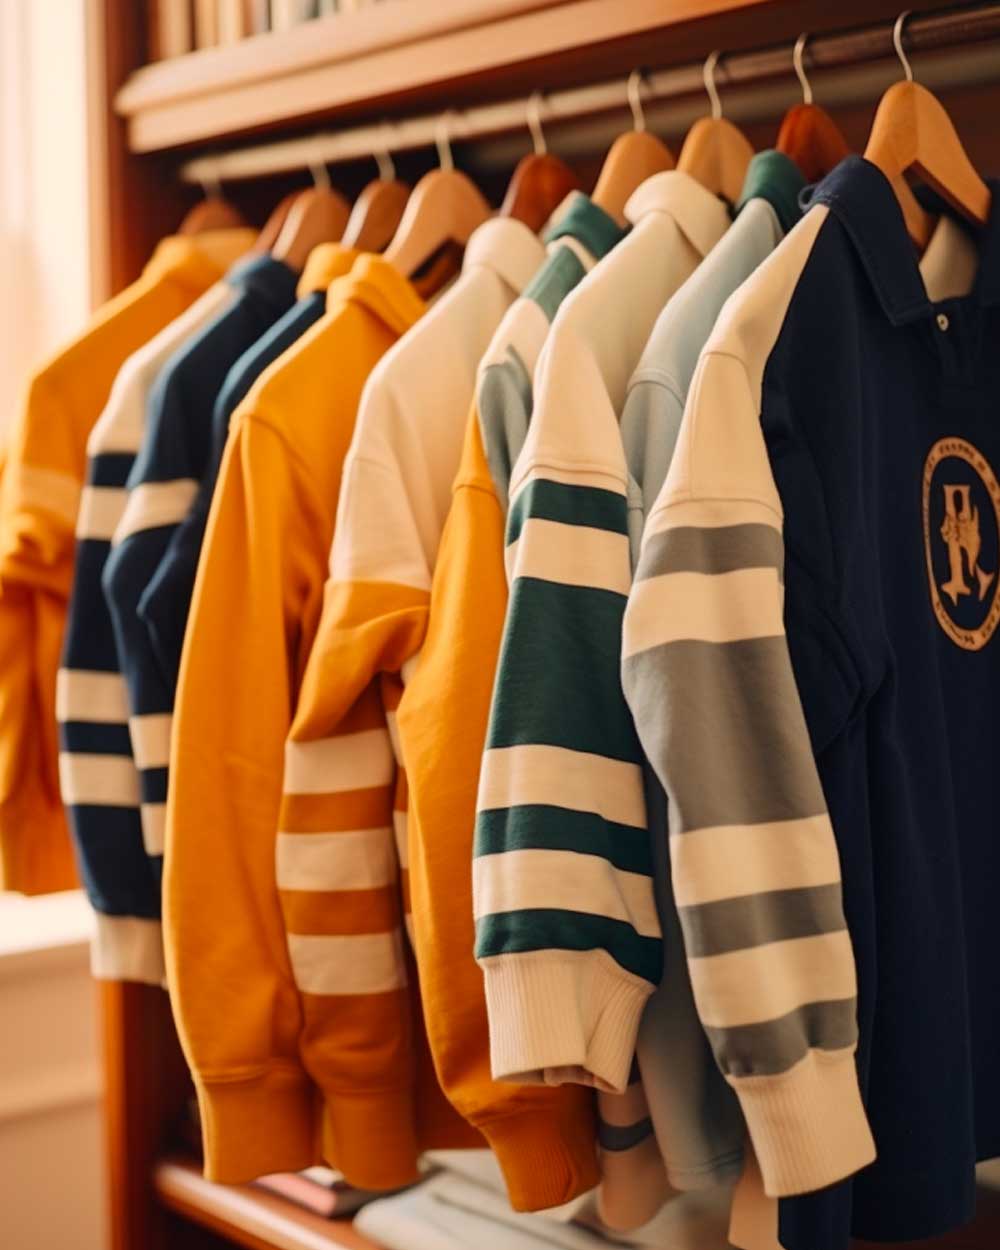 Preppy rugby shirts